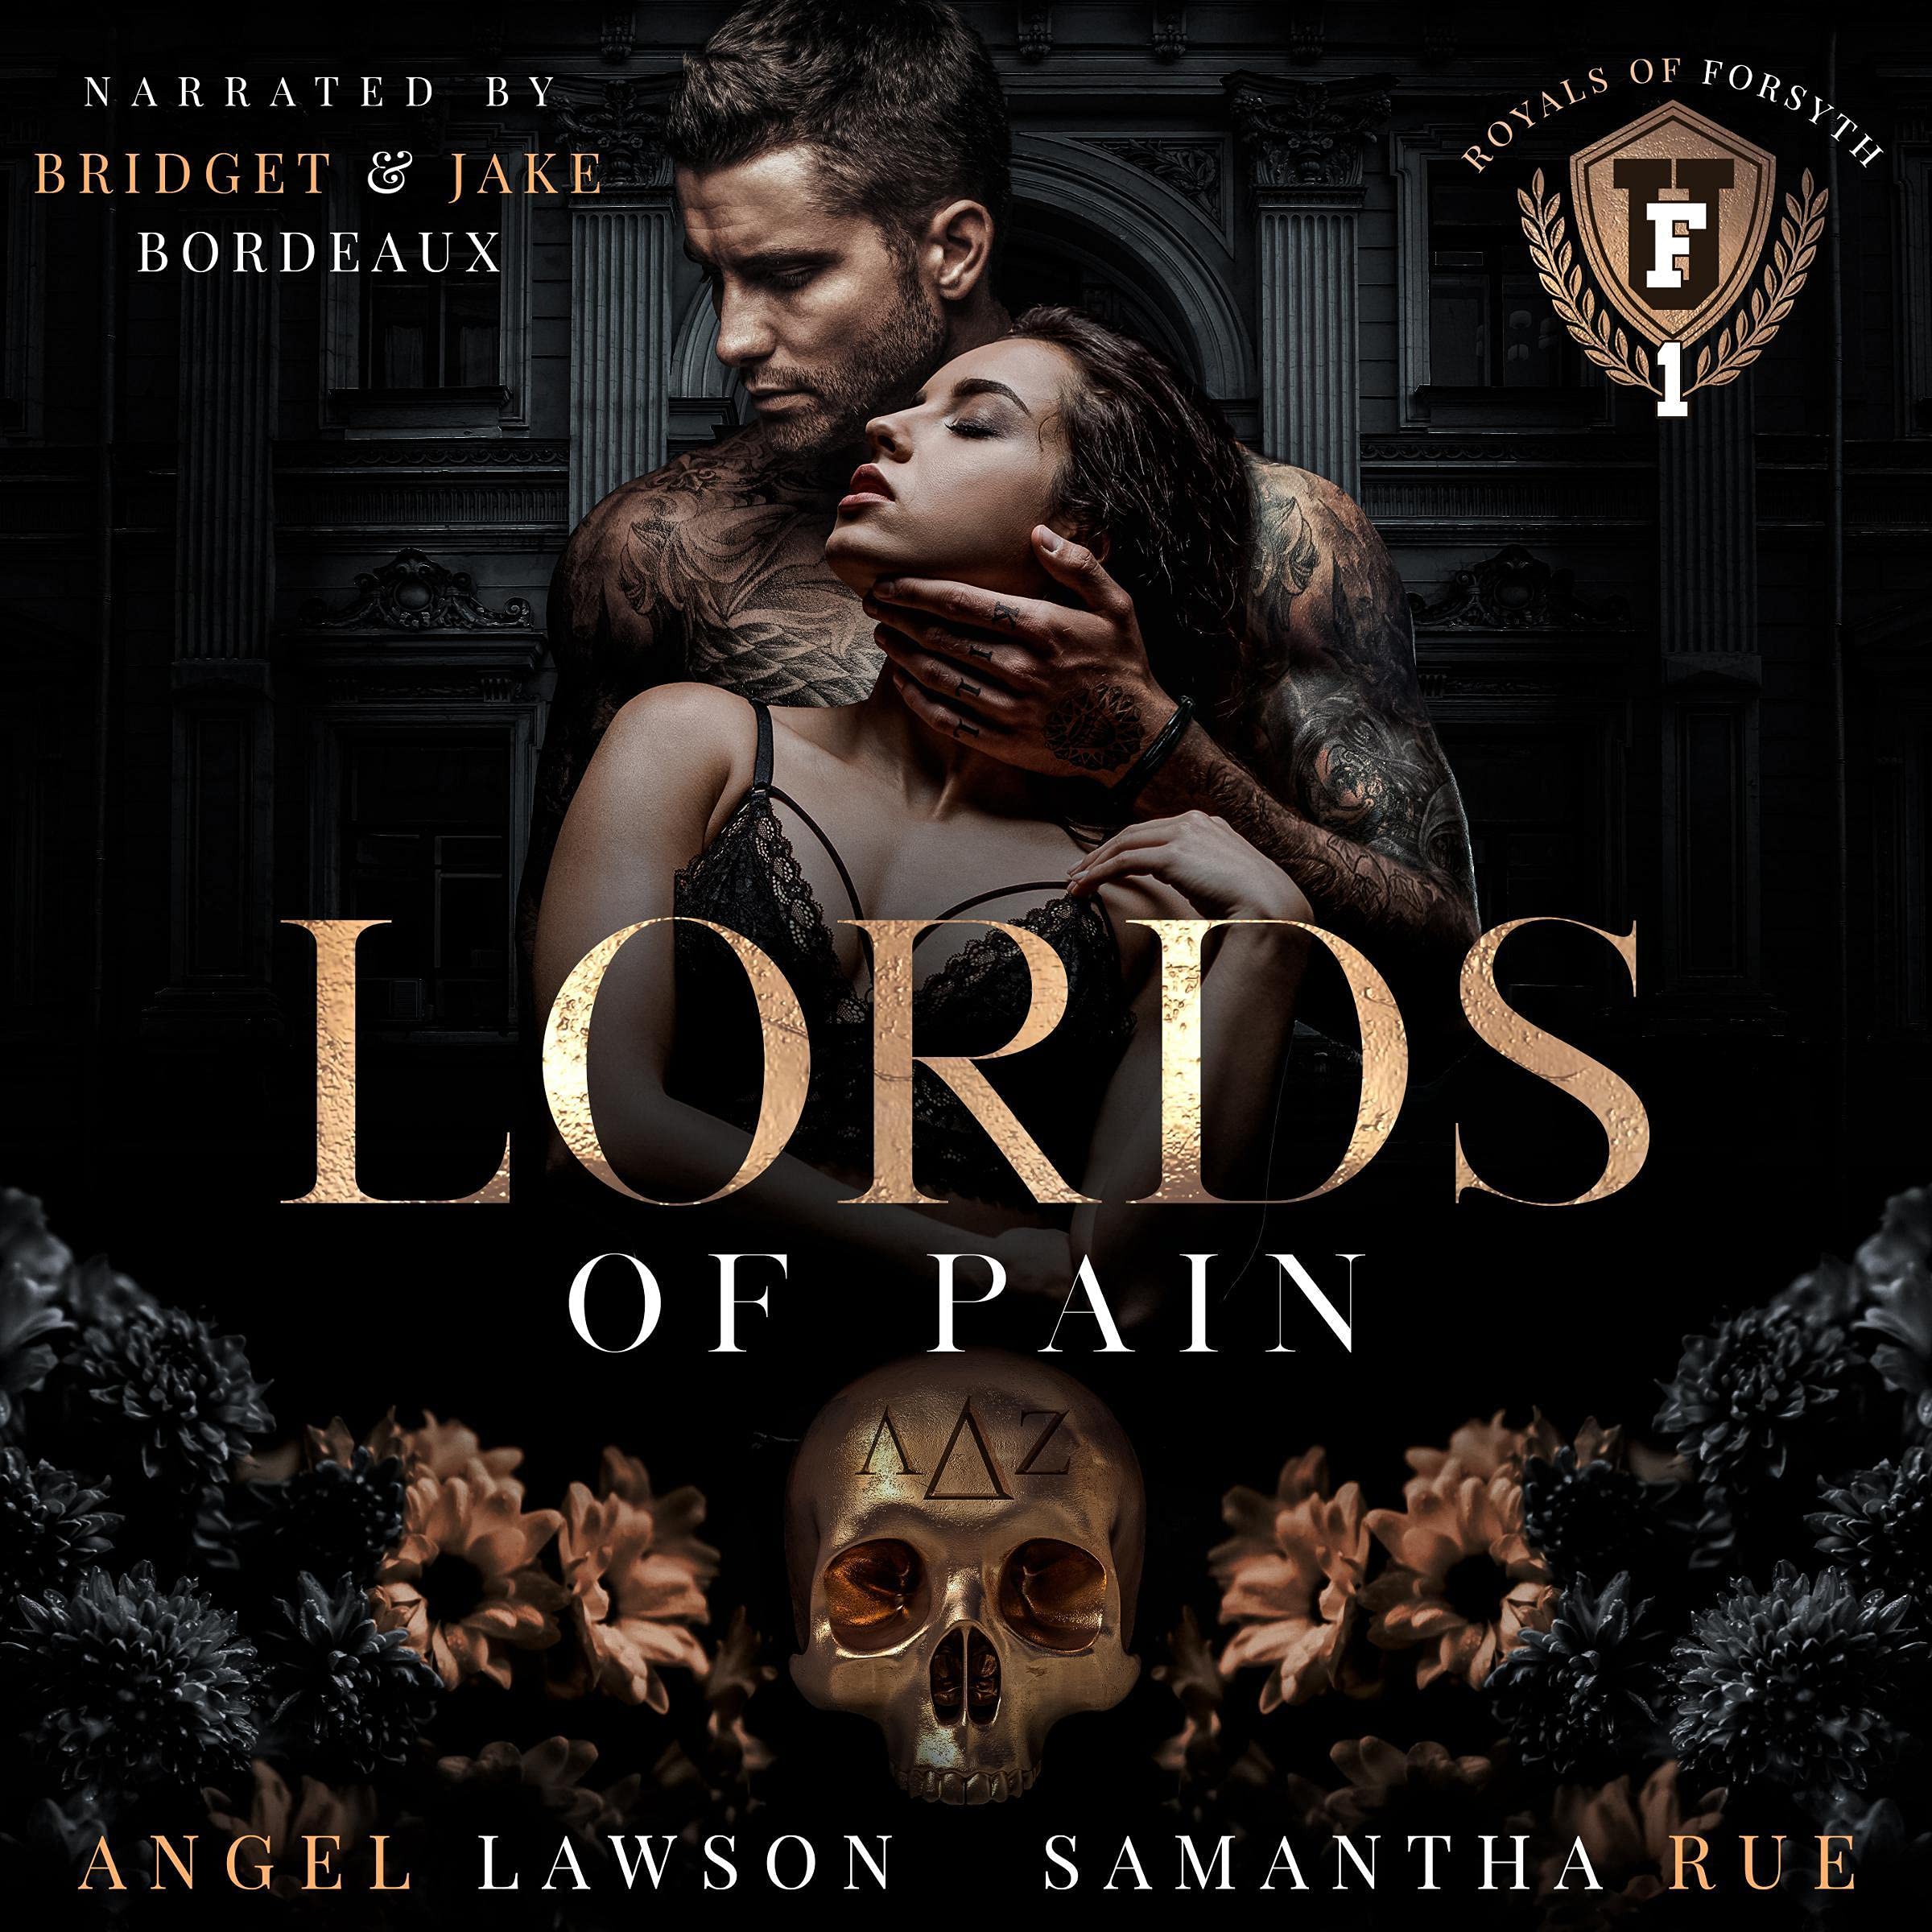 Lords of Pain: Dark College Bully Romance: Royals of Forsyth University